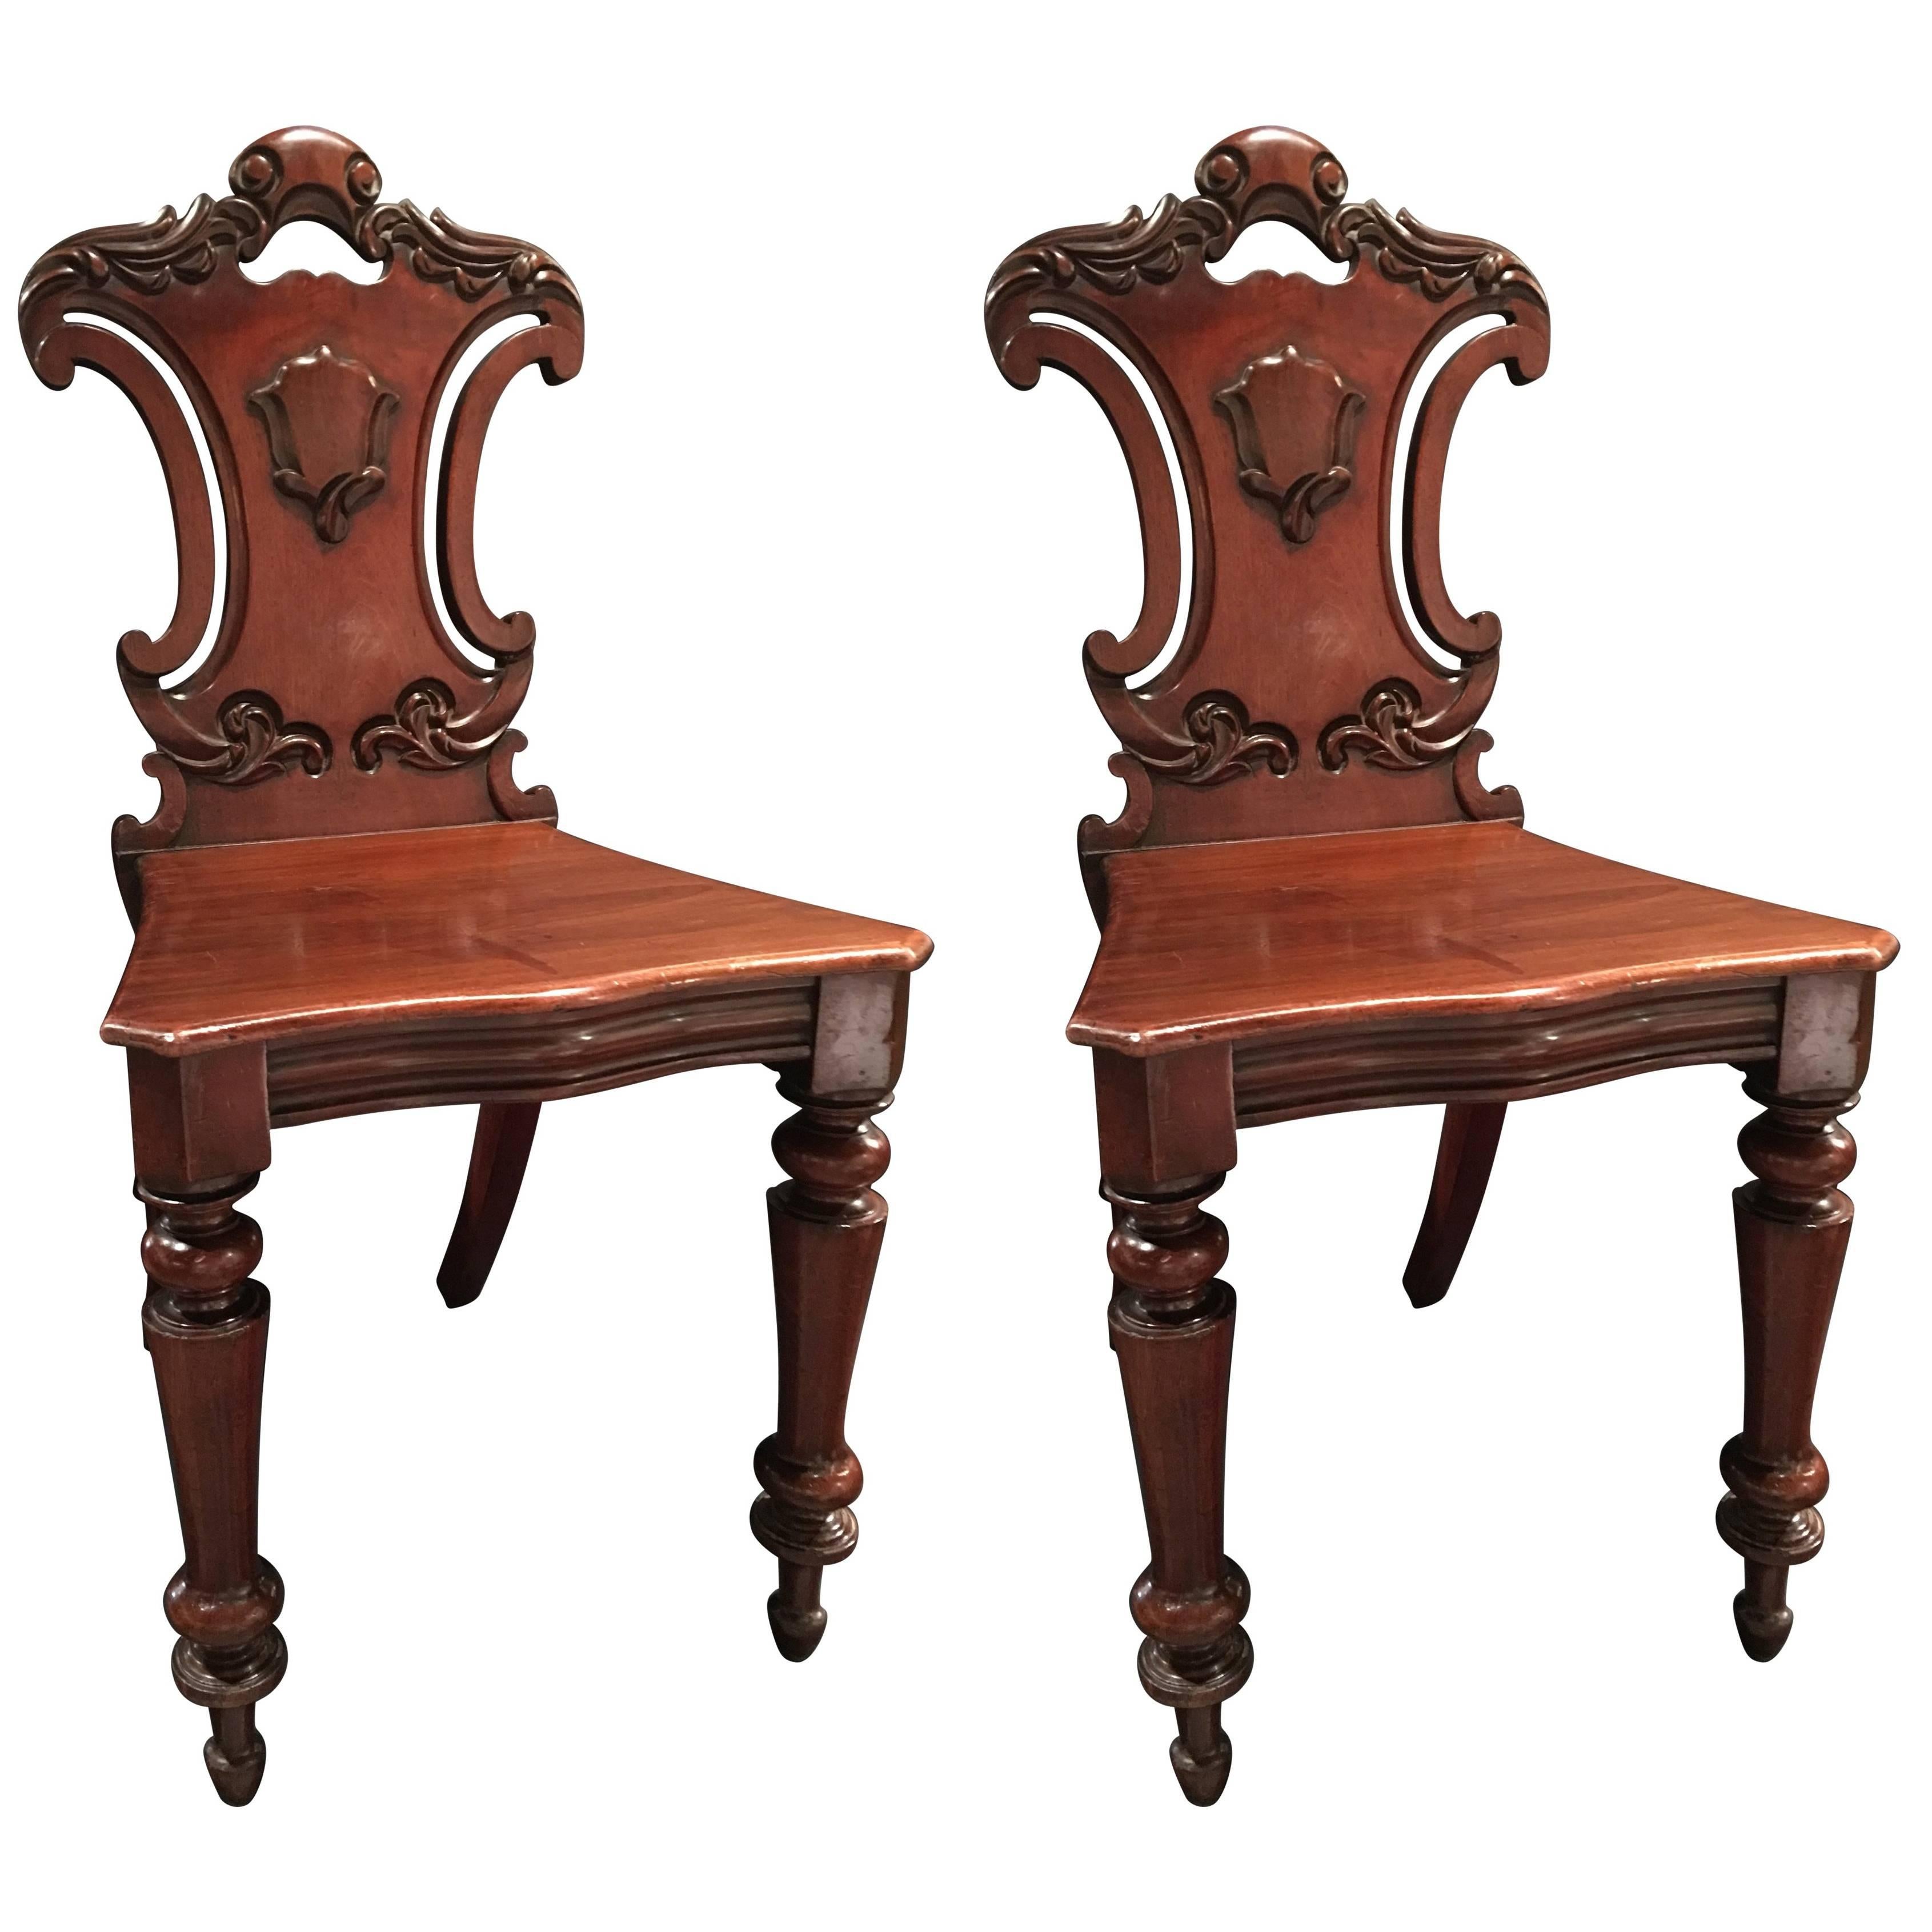 English Mahogany Carved Pair of Hall Chairs, 19th Century